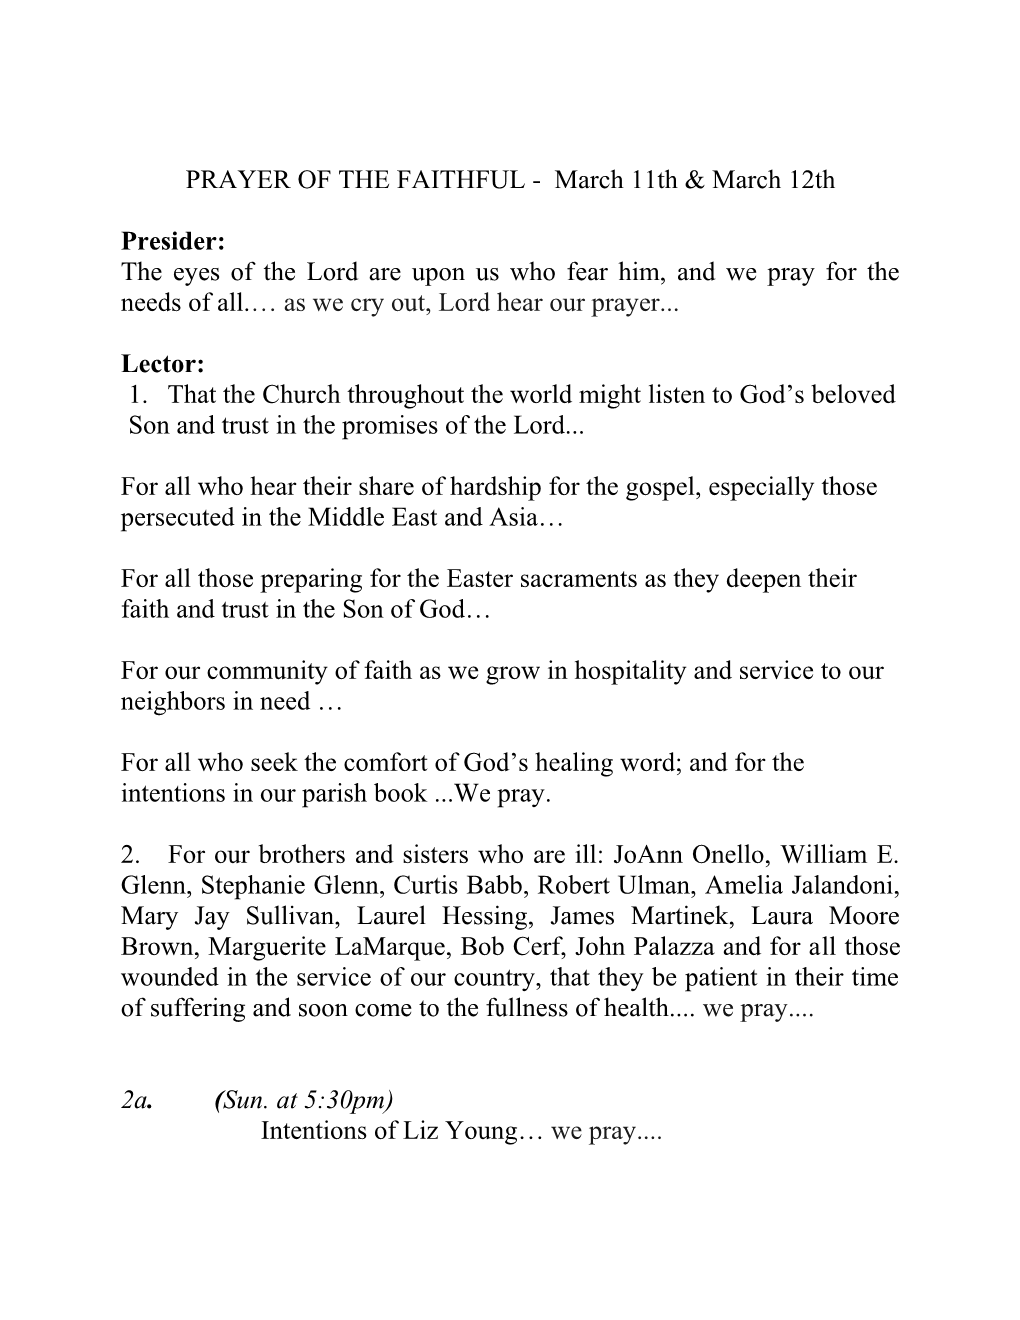 PRAYER of the FAITHFUL - March 11Thmarch12th